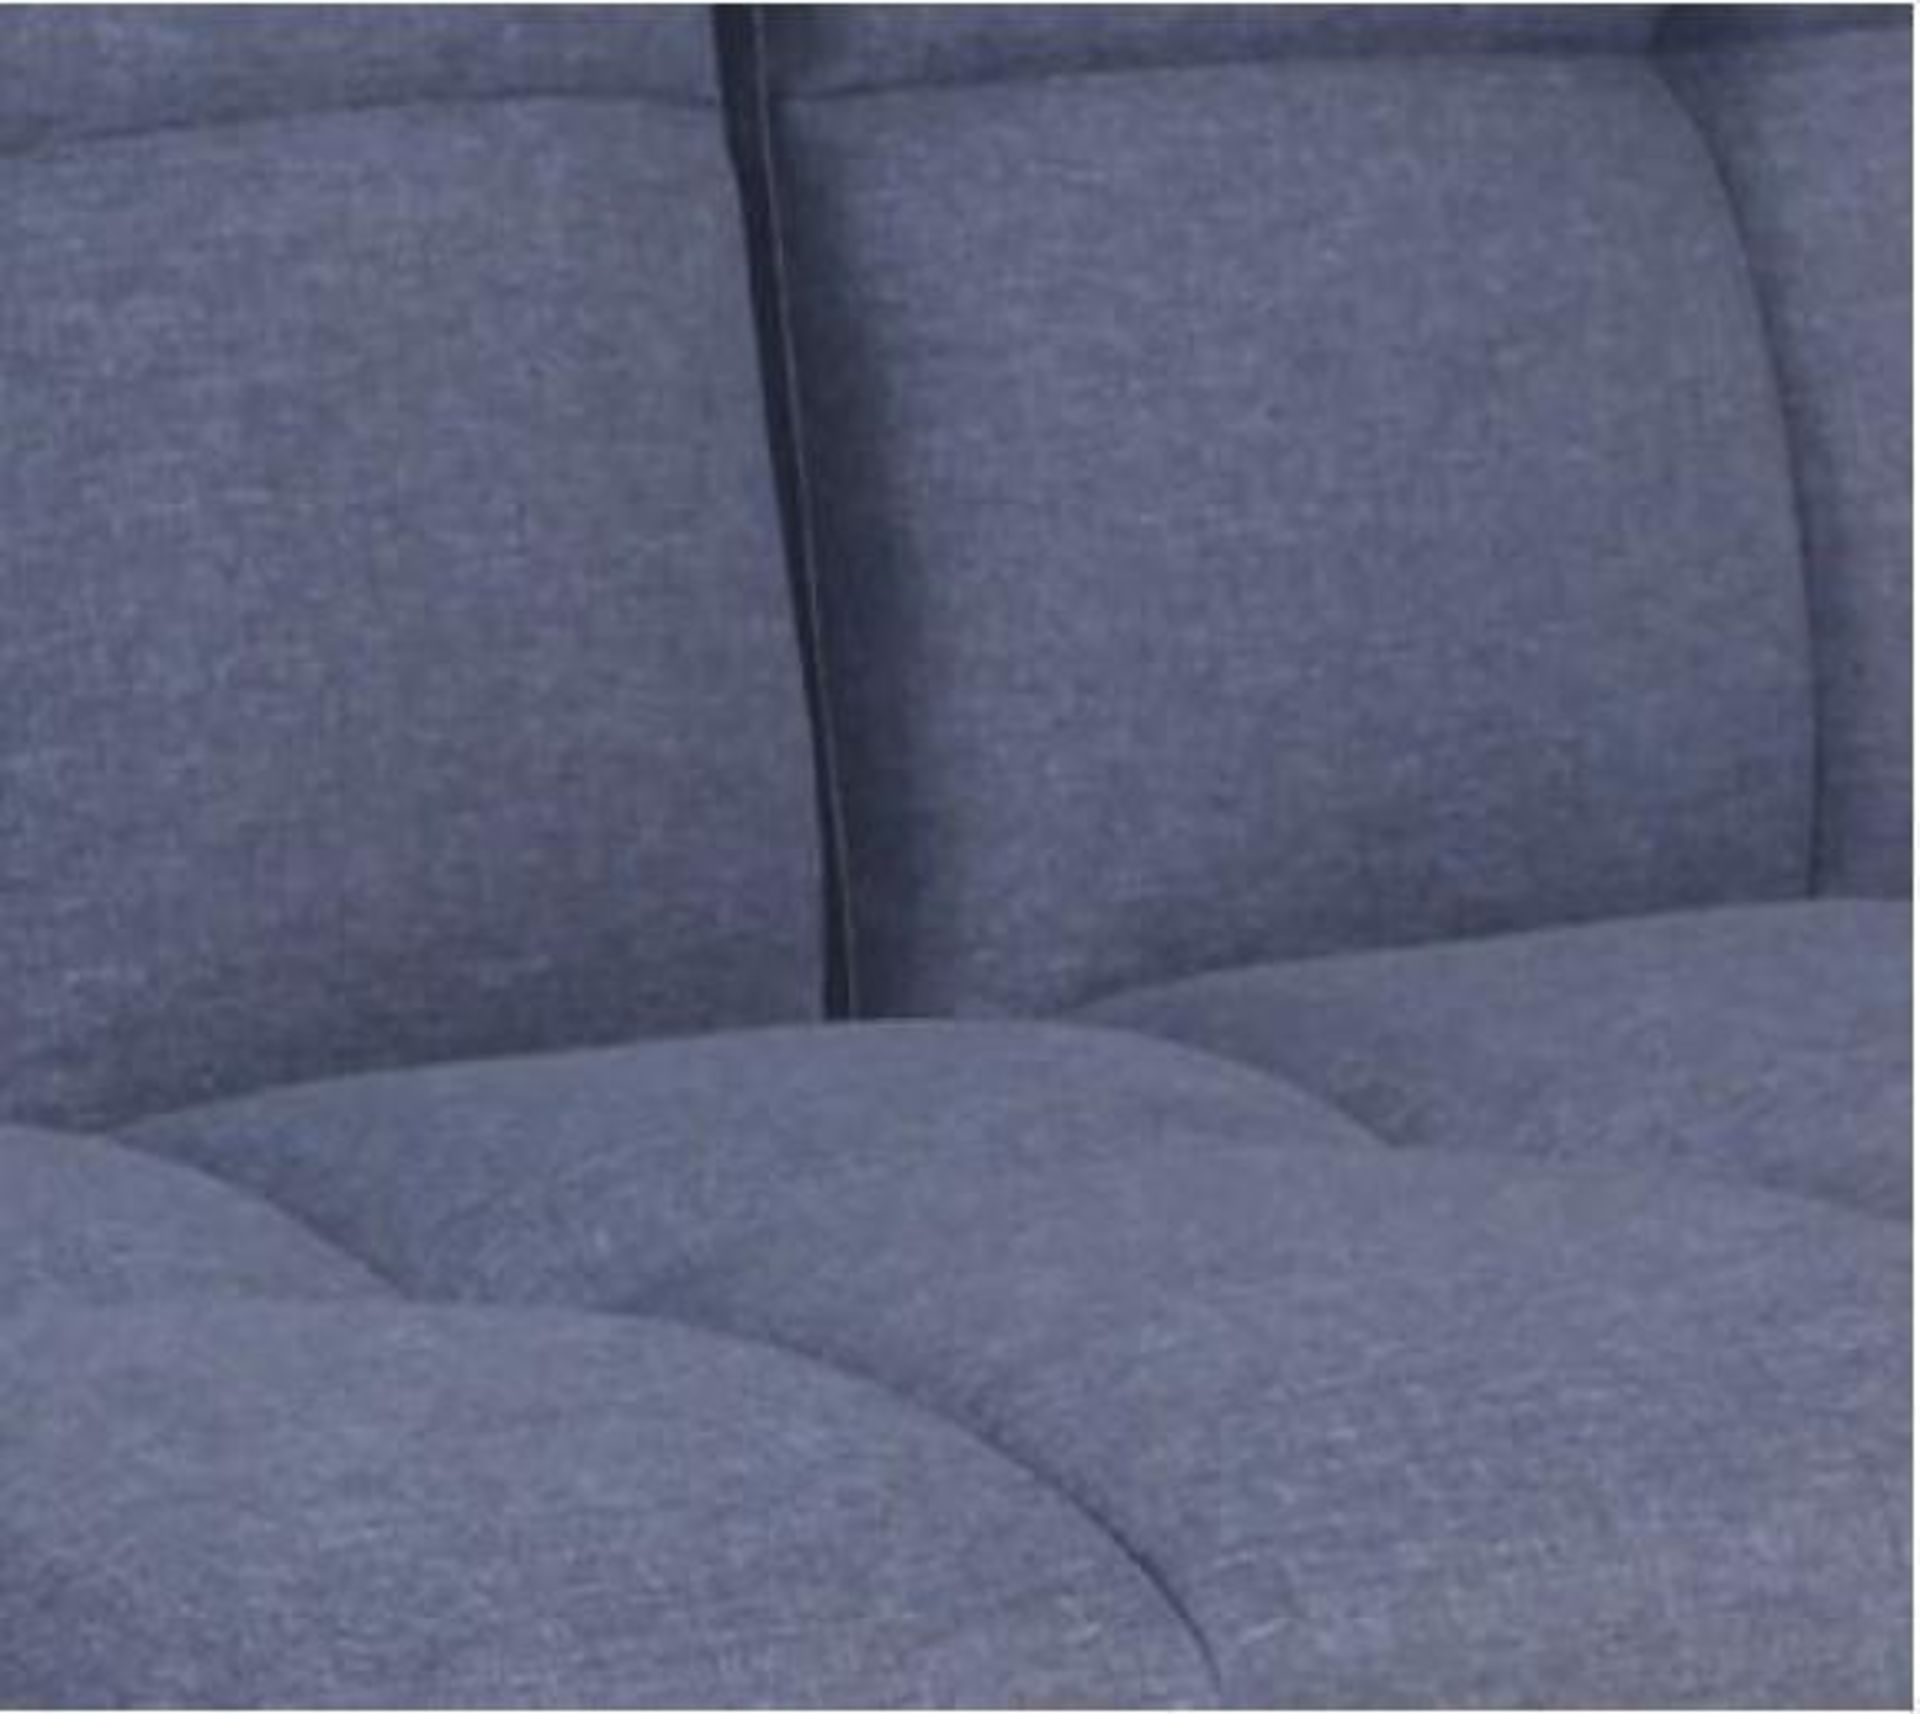 *BRAND NEW* Heavy Duty Clic Clac sofa bed with 2 bolsters, dual usb & charger socket. - Image 9 of 11